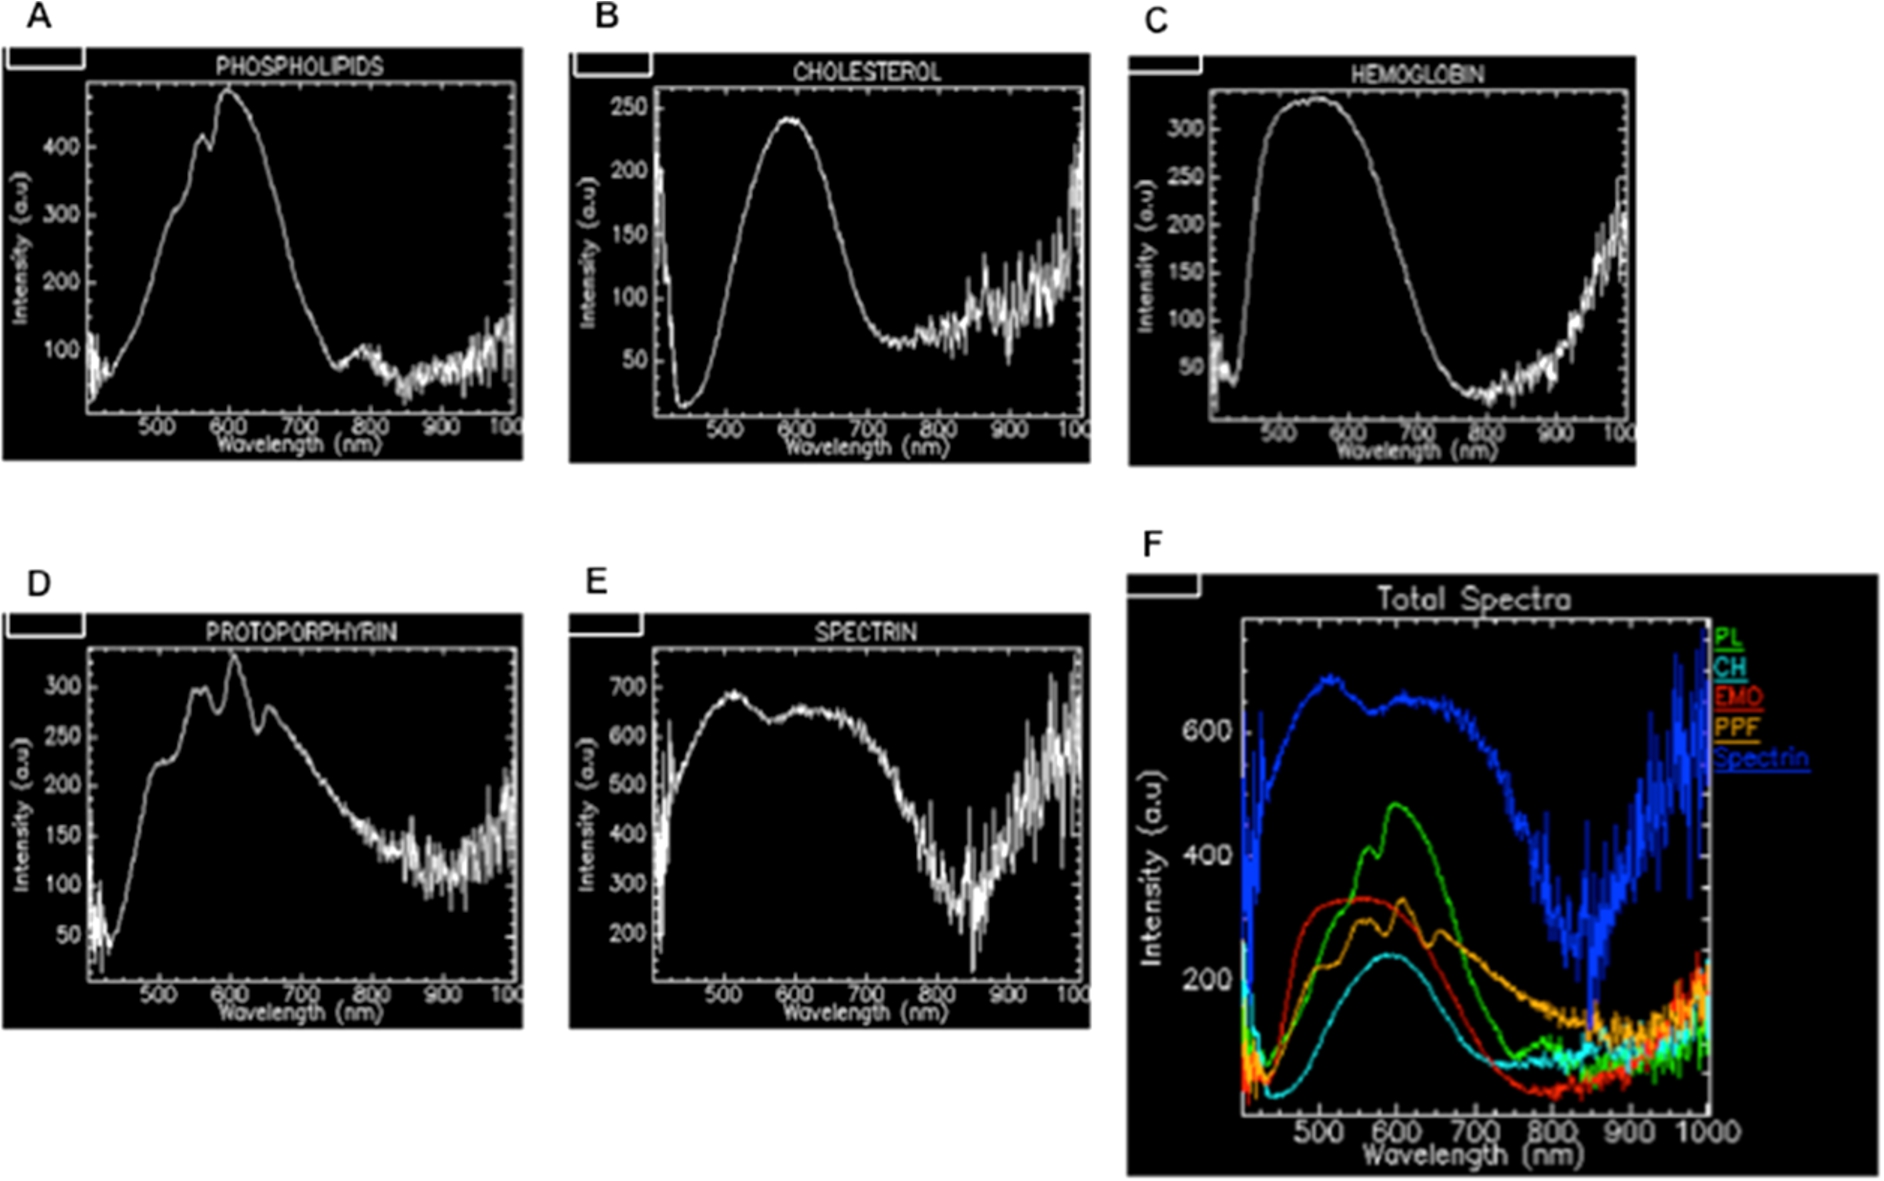 HDFM spectra of five representative components of red blood cells prepared in solution or suspension as described in Section 2: (A) phospholipids as egg lecithin liposome; (B) cholesterol; (C) hemoglobin; (D) protoporphyrin IX; (E) spectrin. The spectrum (F) shows all the spectra with arbitrary color code for RBC mapping as shown in Fig. 2(E).